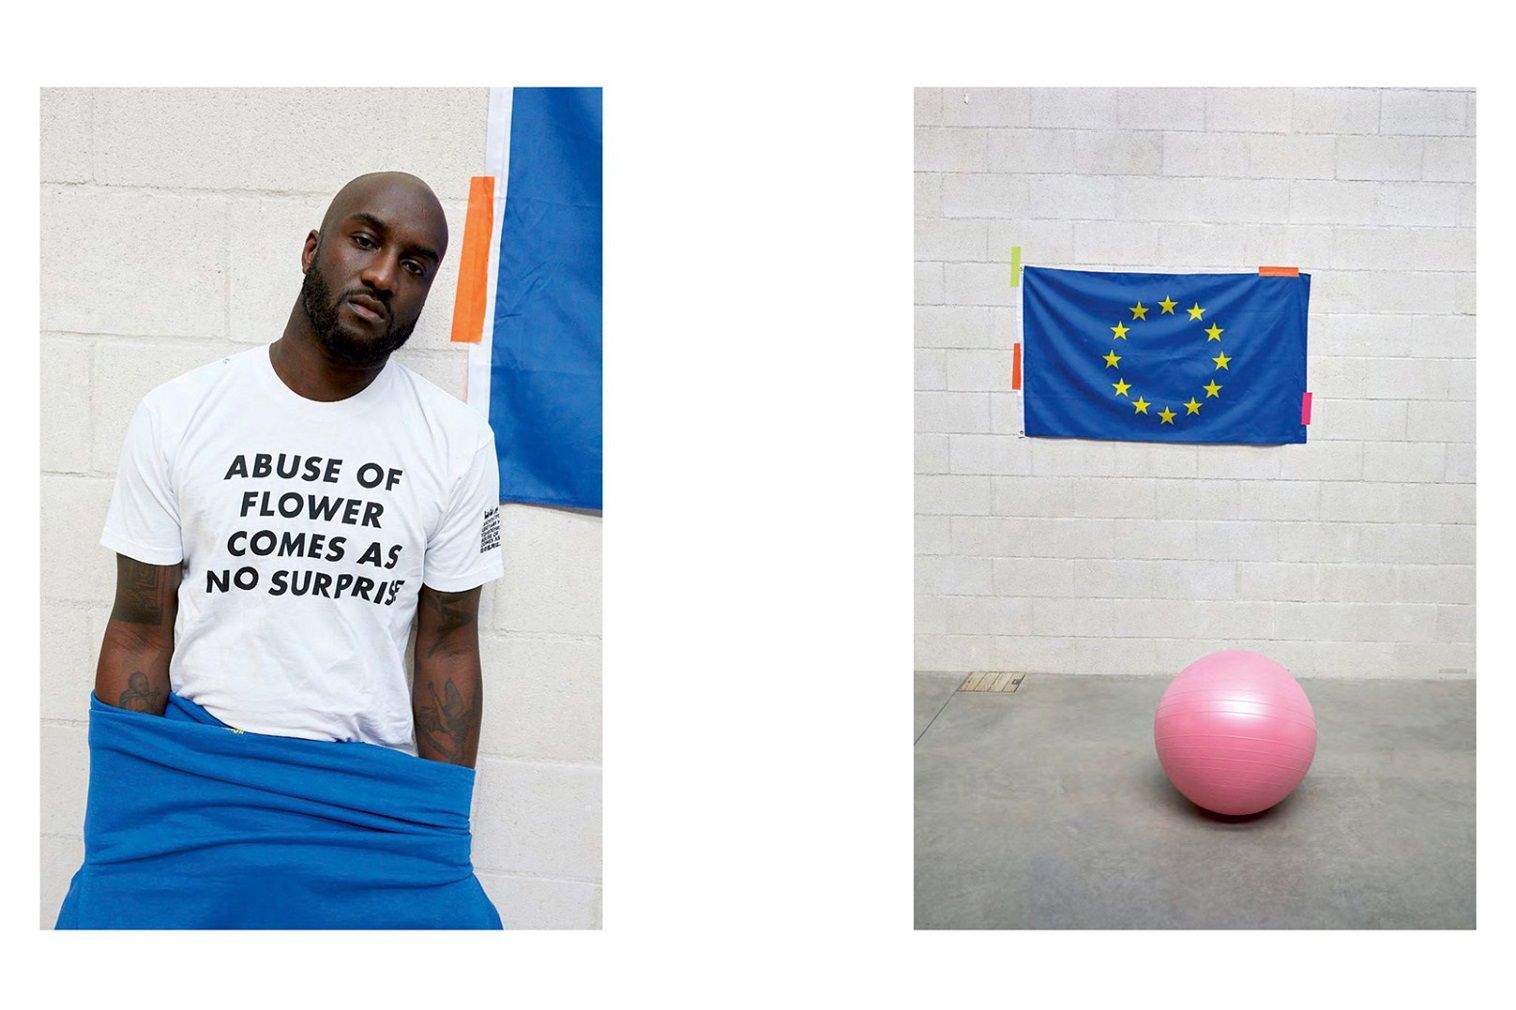 Virgil Abloh X IKEA Collab: 'I use other factories and suppliers to make  art, 